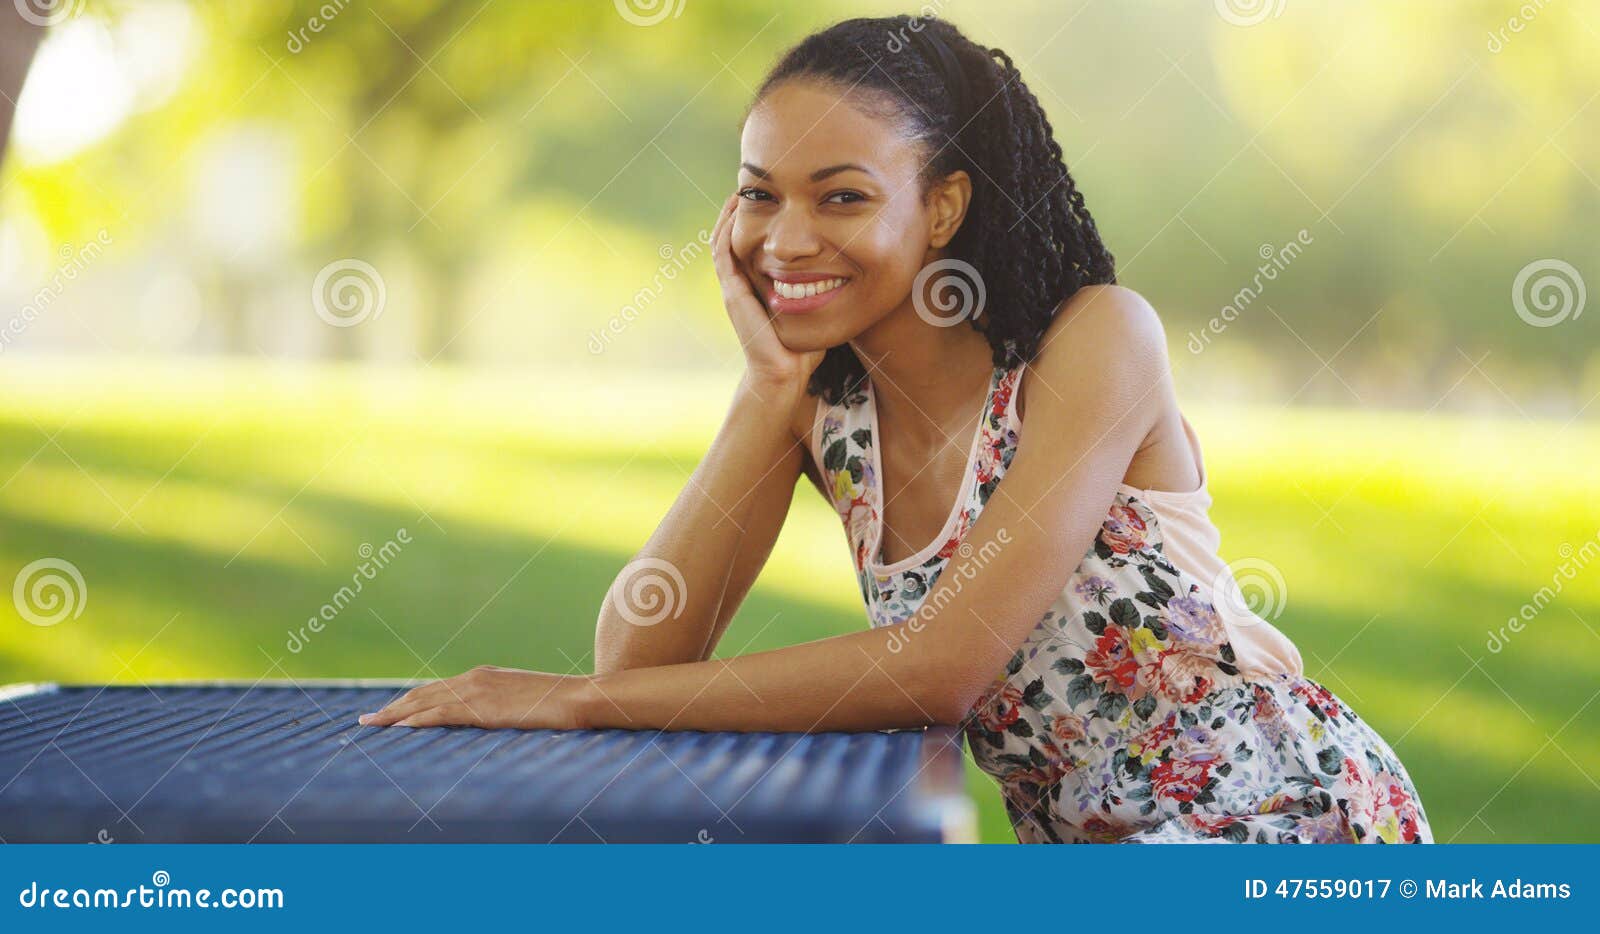 Woman in Black Brassiere and Black Leggings Sitting on Brown Wooden Bench ·  Free Stock Photo